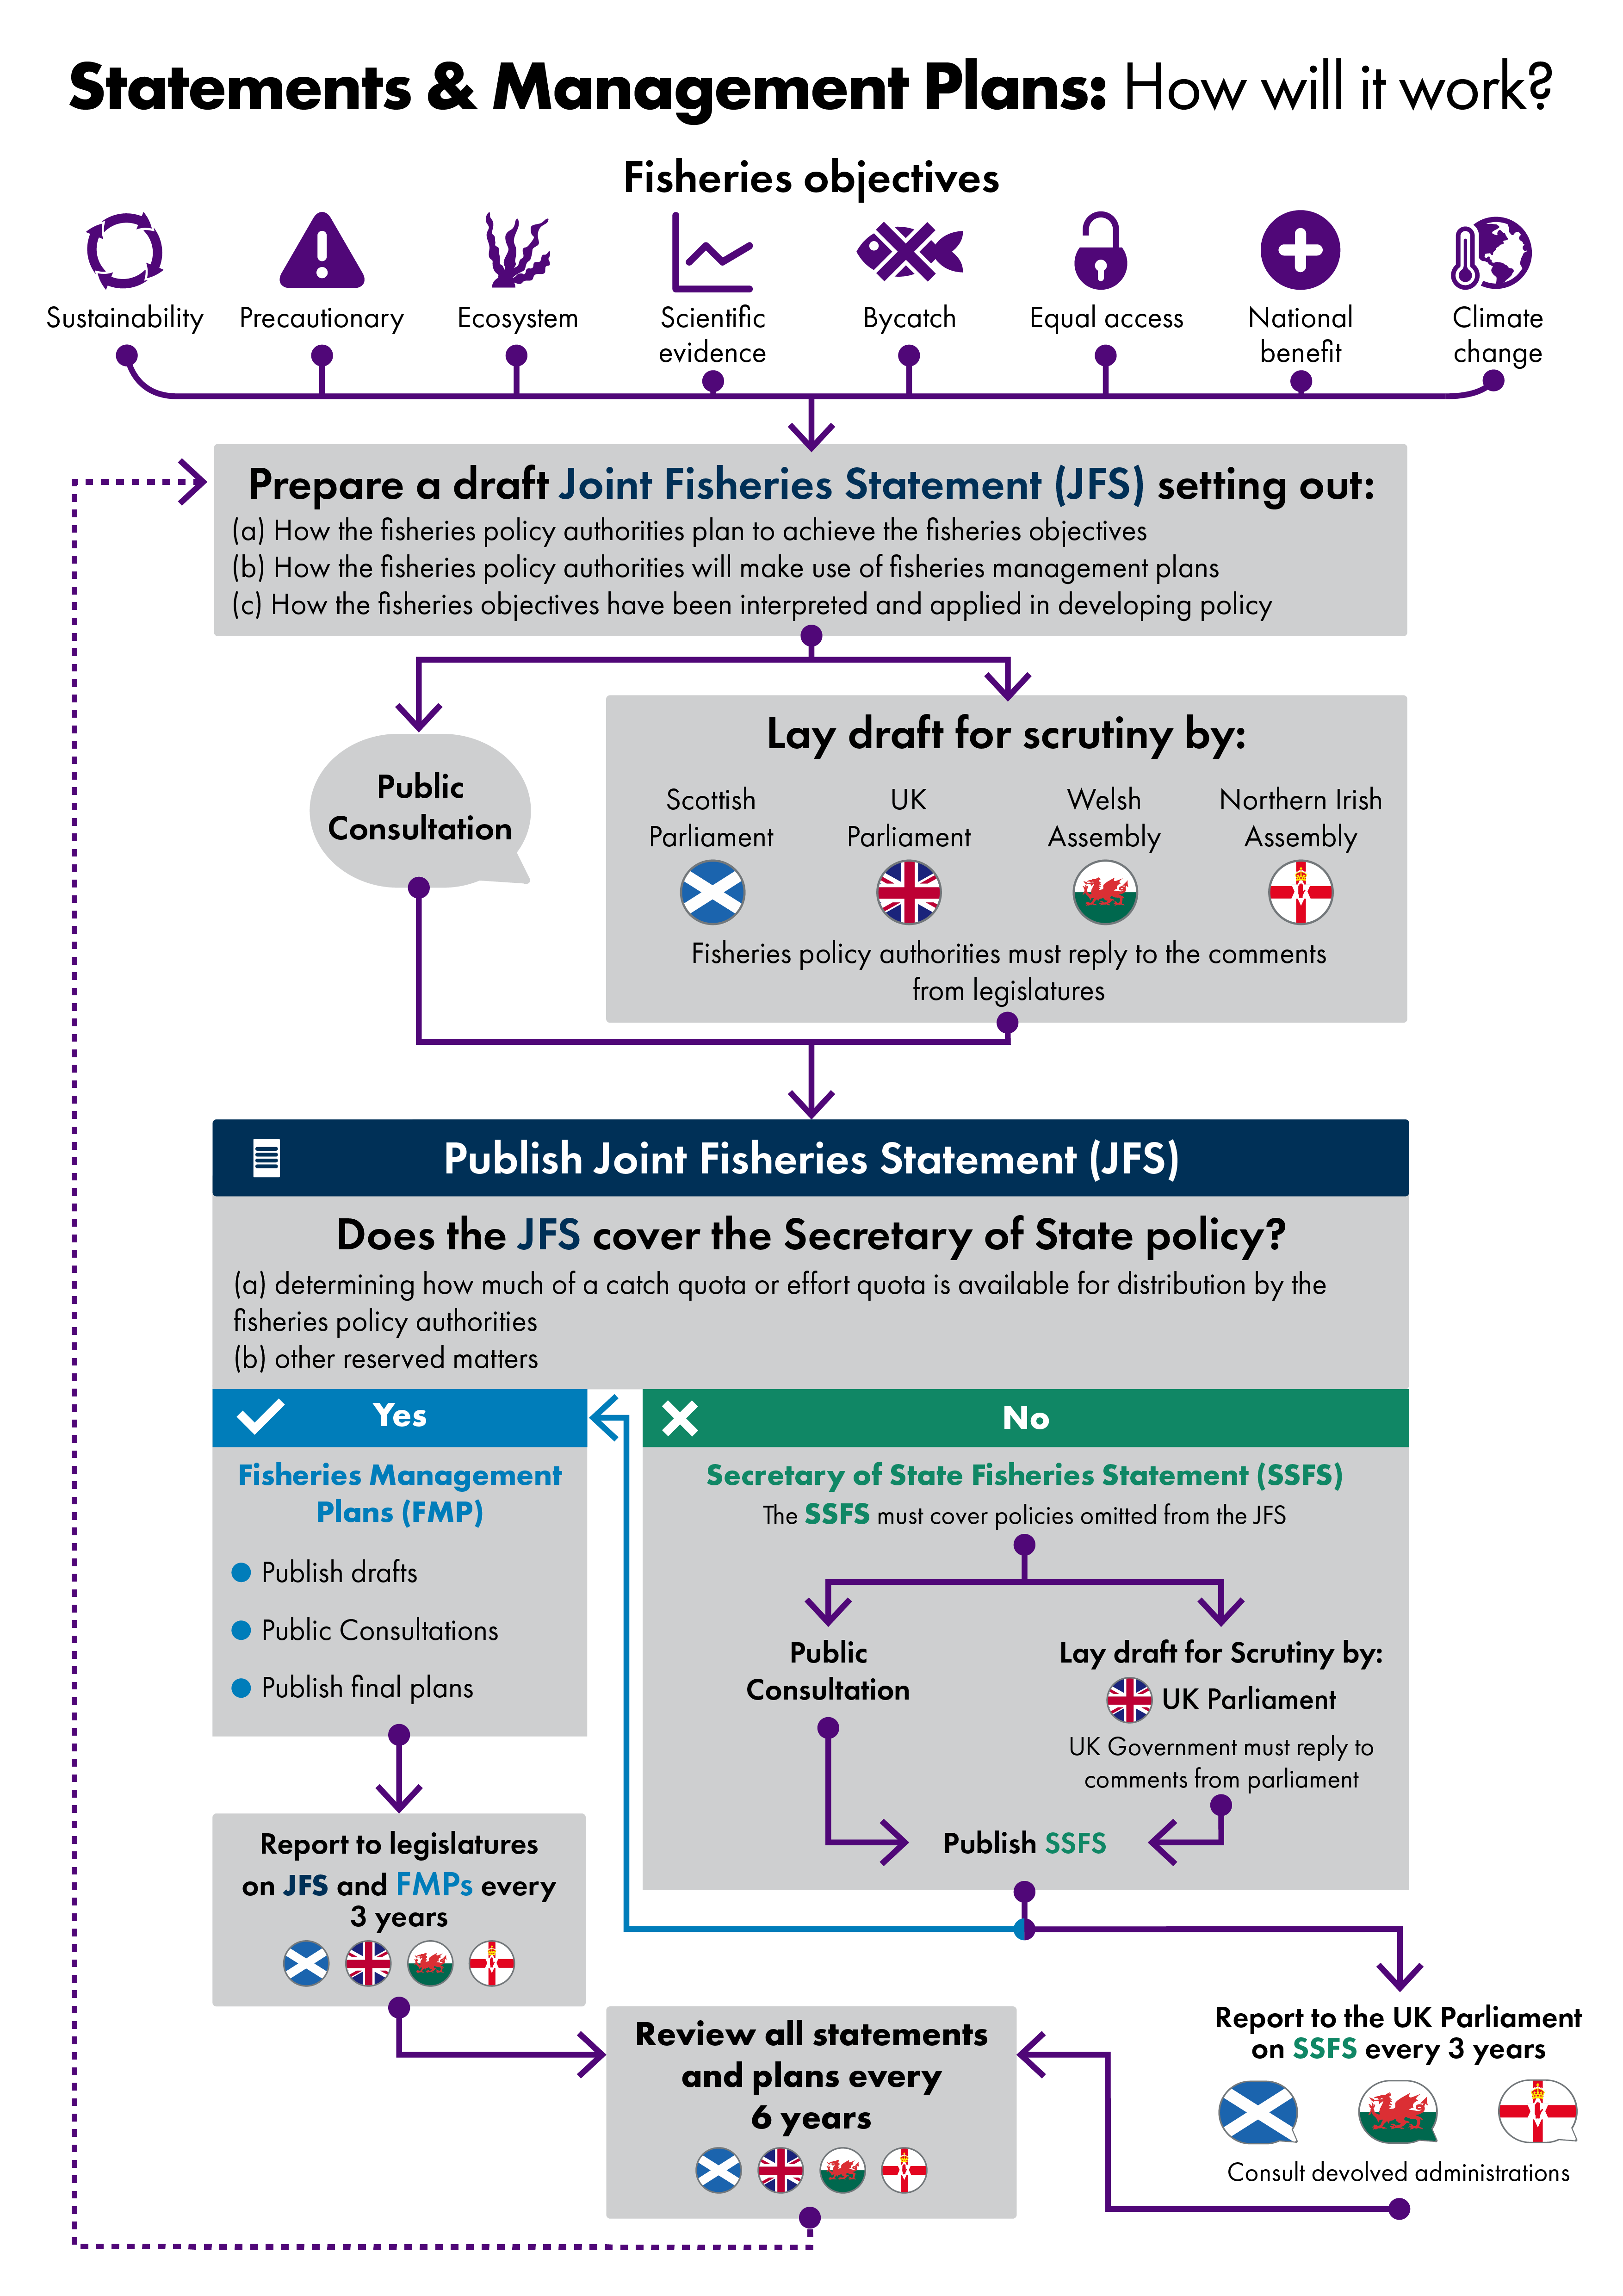 Flow diagram setting out how Joint Fisheries Statements are developed and approved by the UK Government and devolved administrations